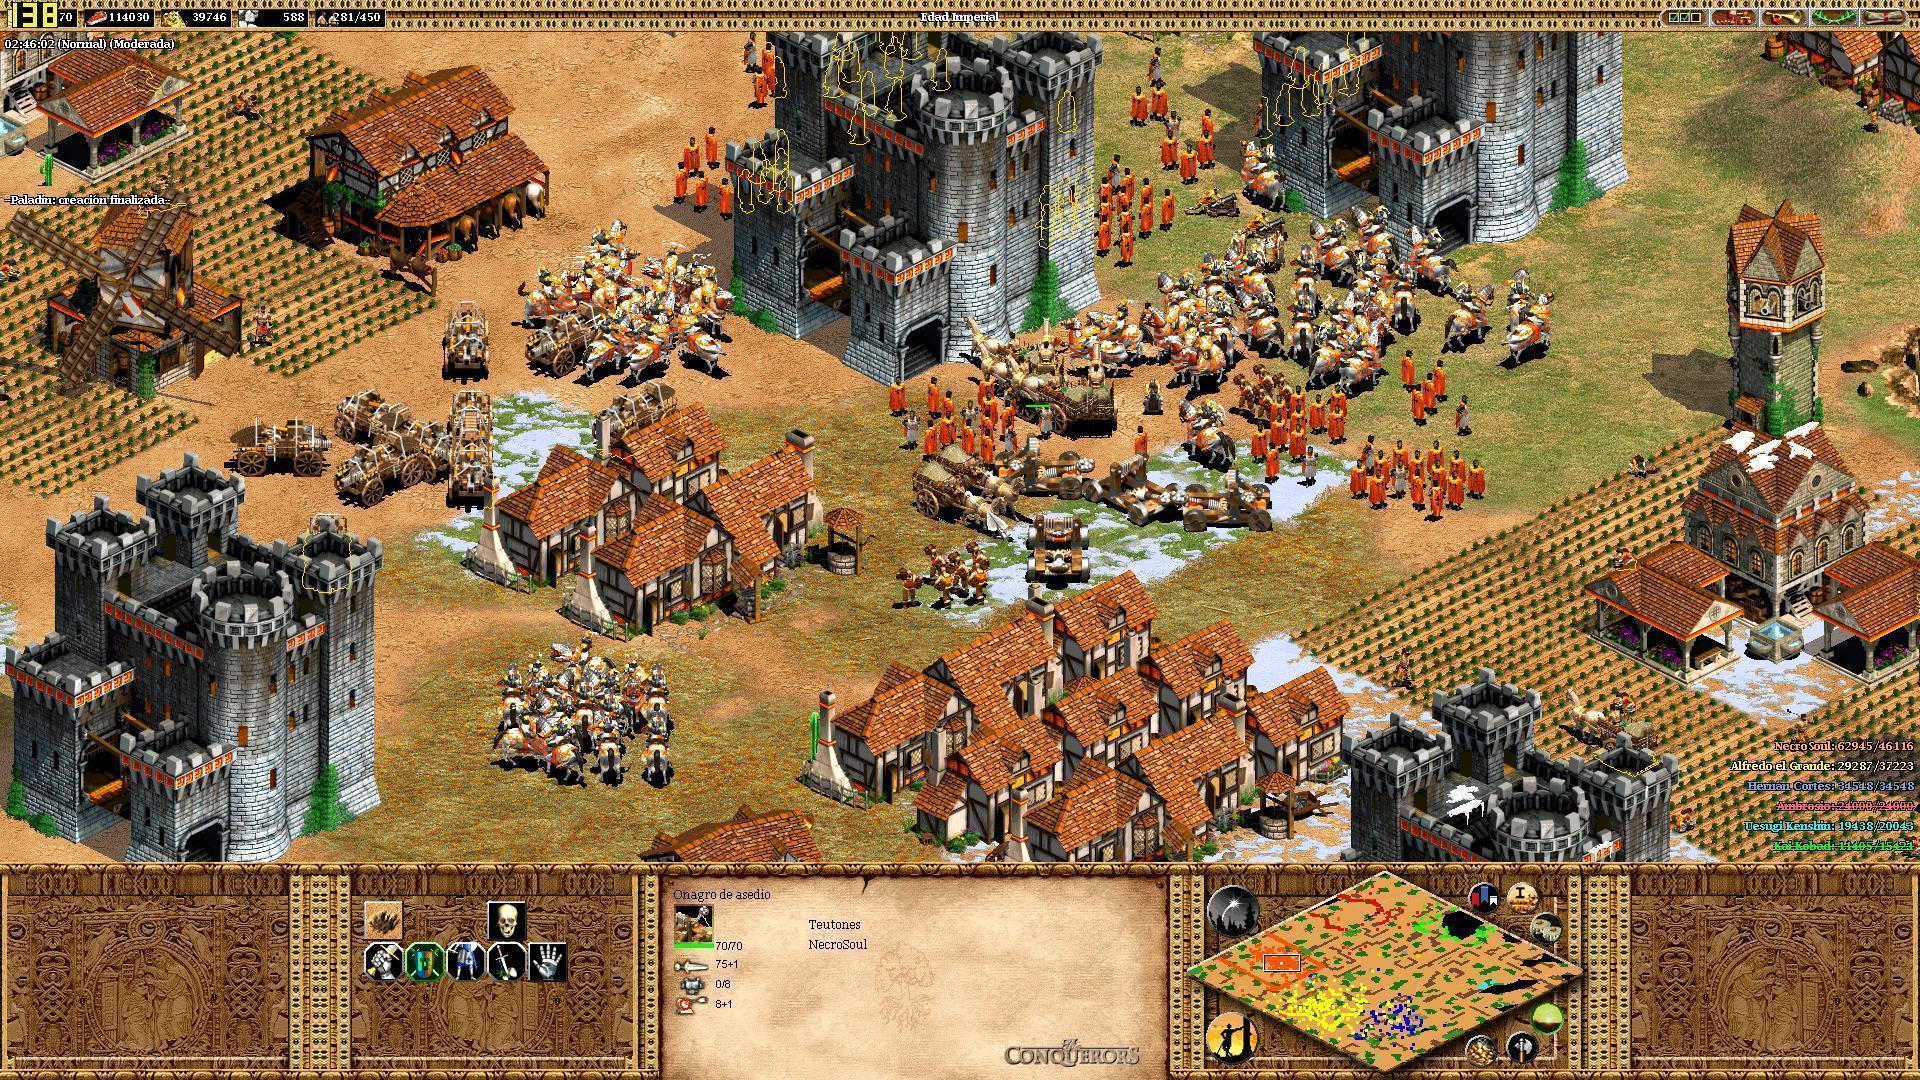 Gallery For > Age Of Empires Wallpaper